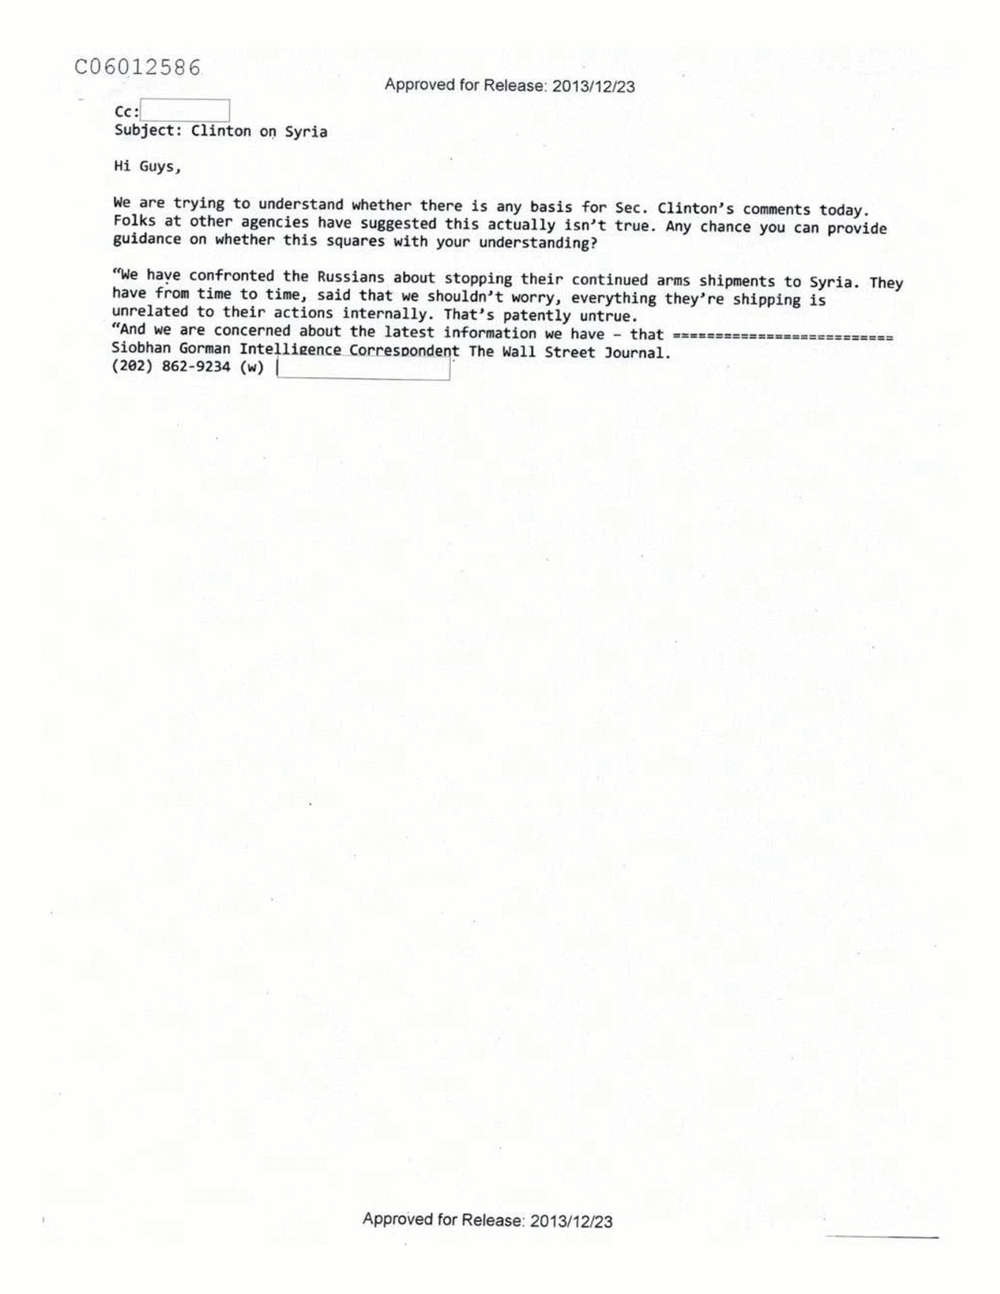 Page 132 from Email Correspondence Between Reporters and CIA Flacks